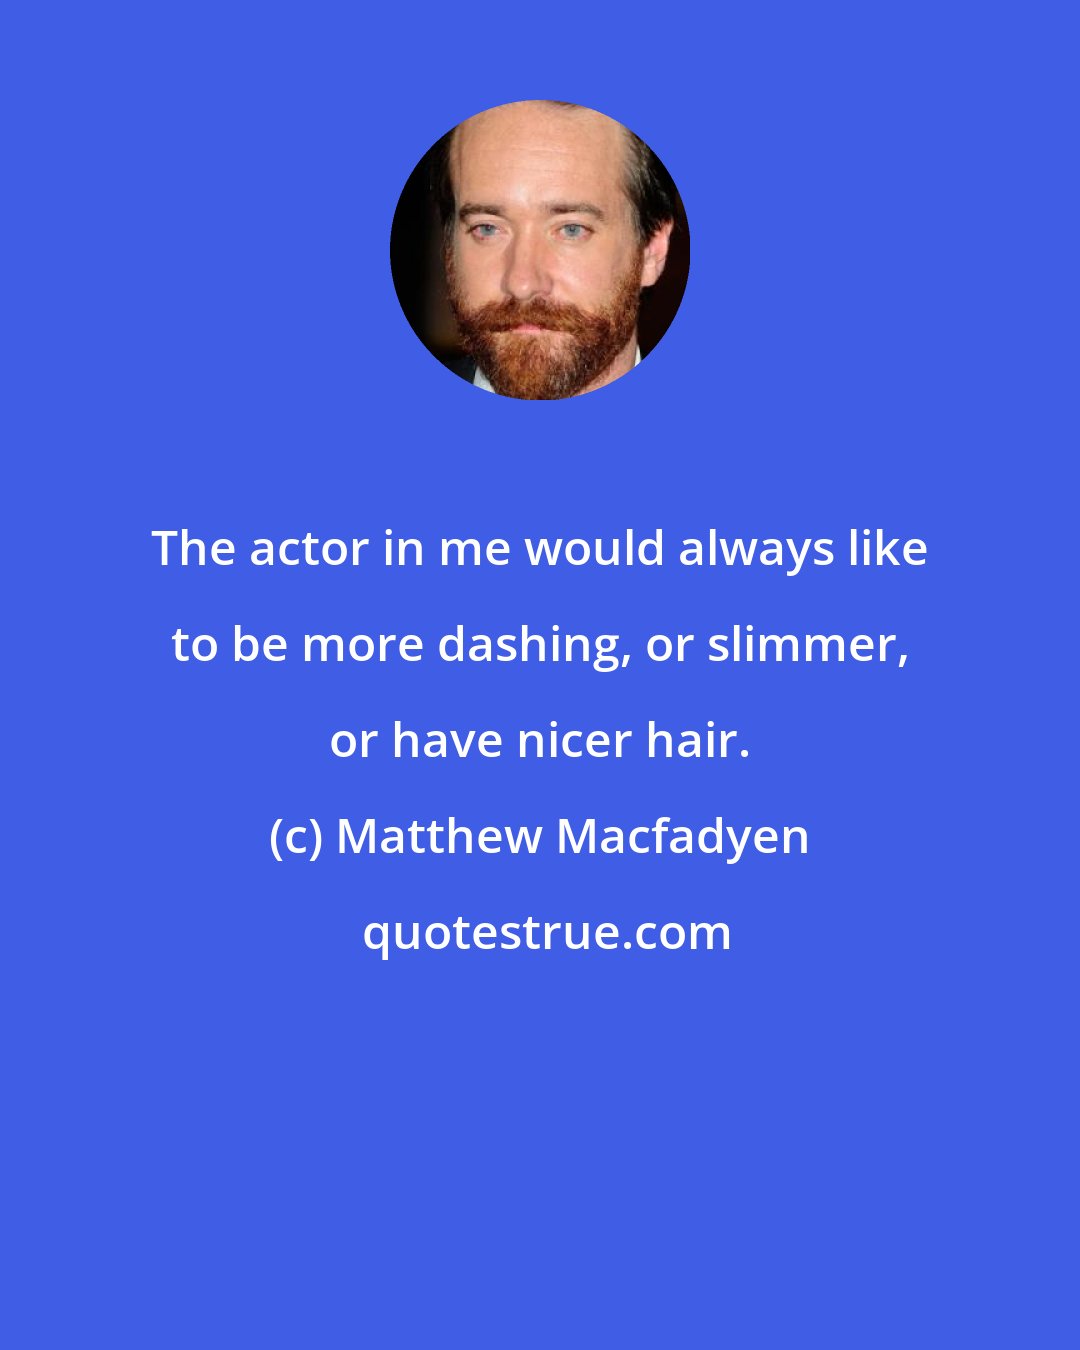 Matthew Macfadyen: The actor in me would always like to be more dashing, or slimmer, or have nicer hair.